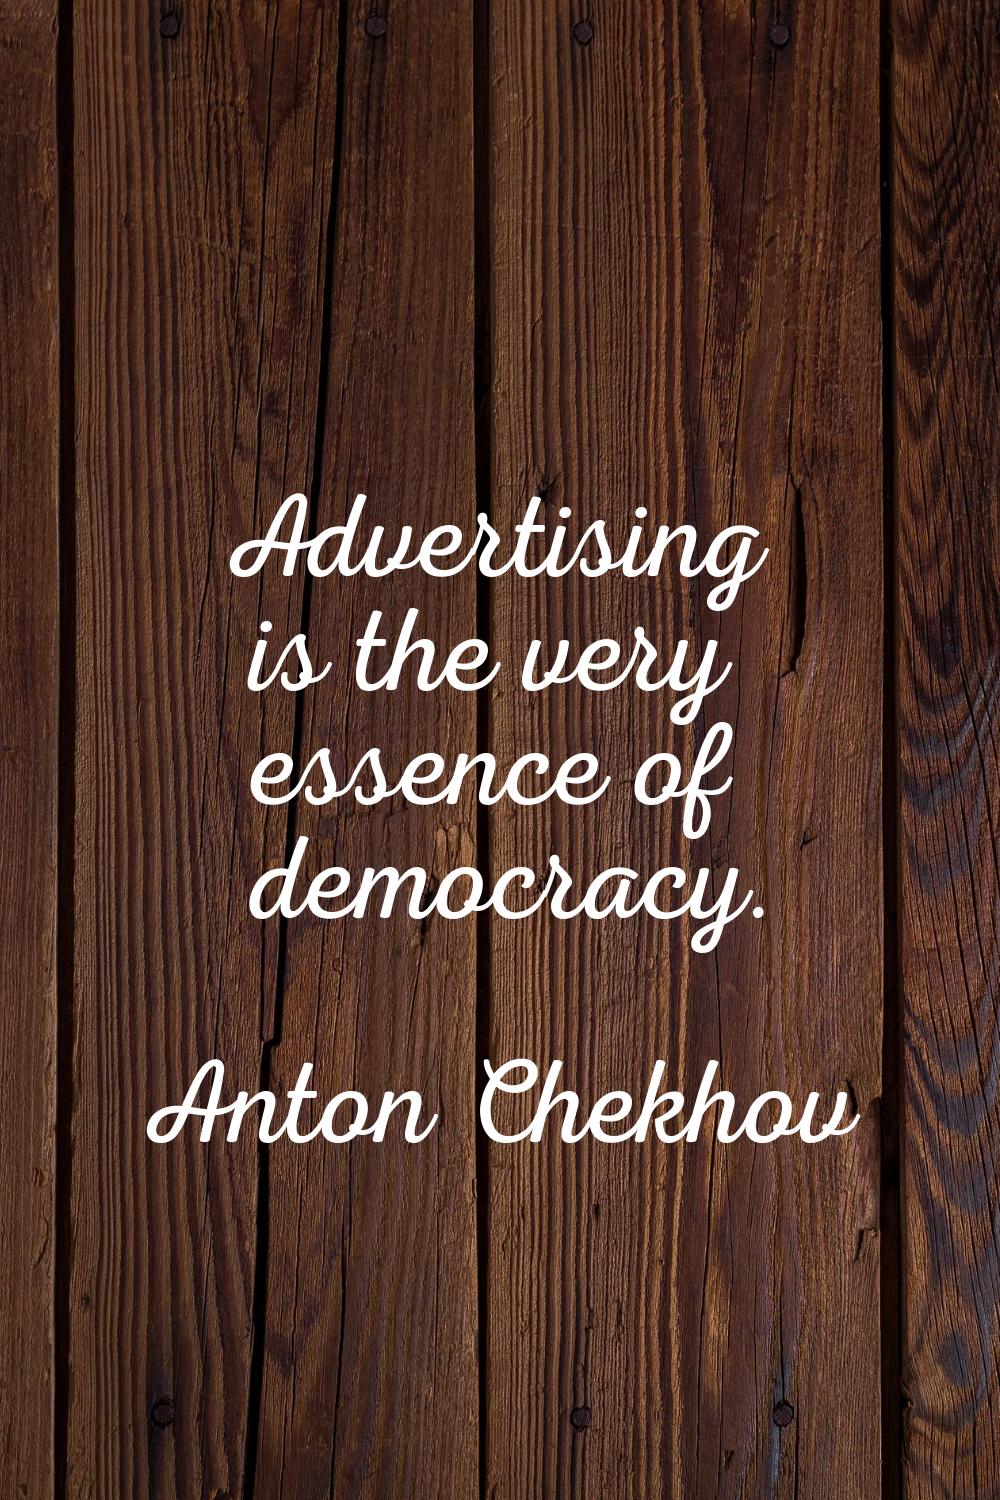 Advertising is the very essence of democracy.